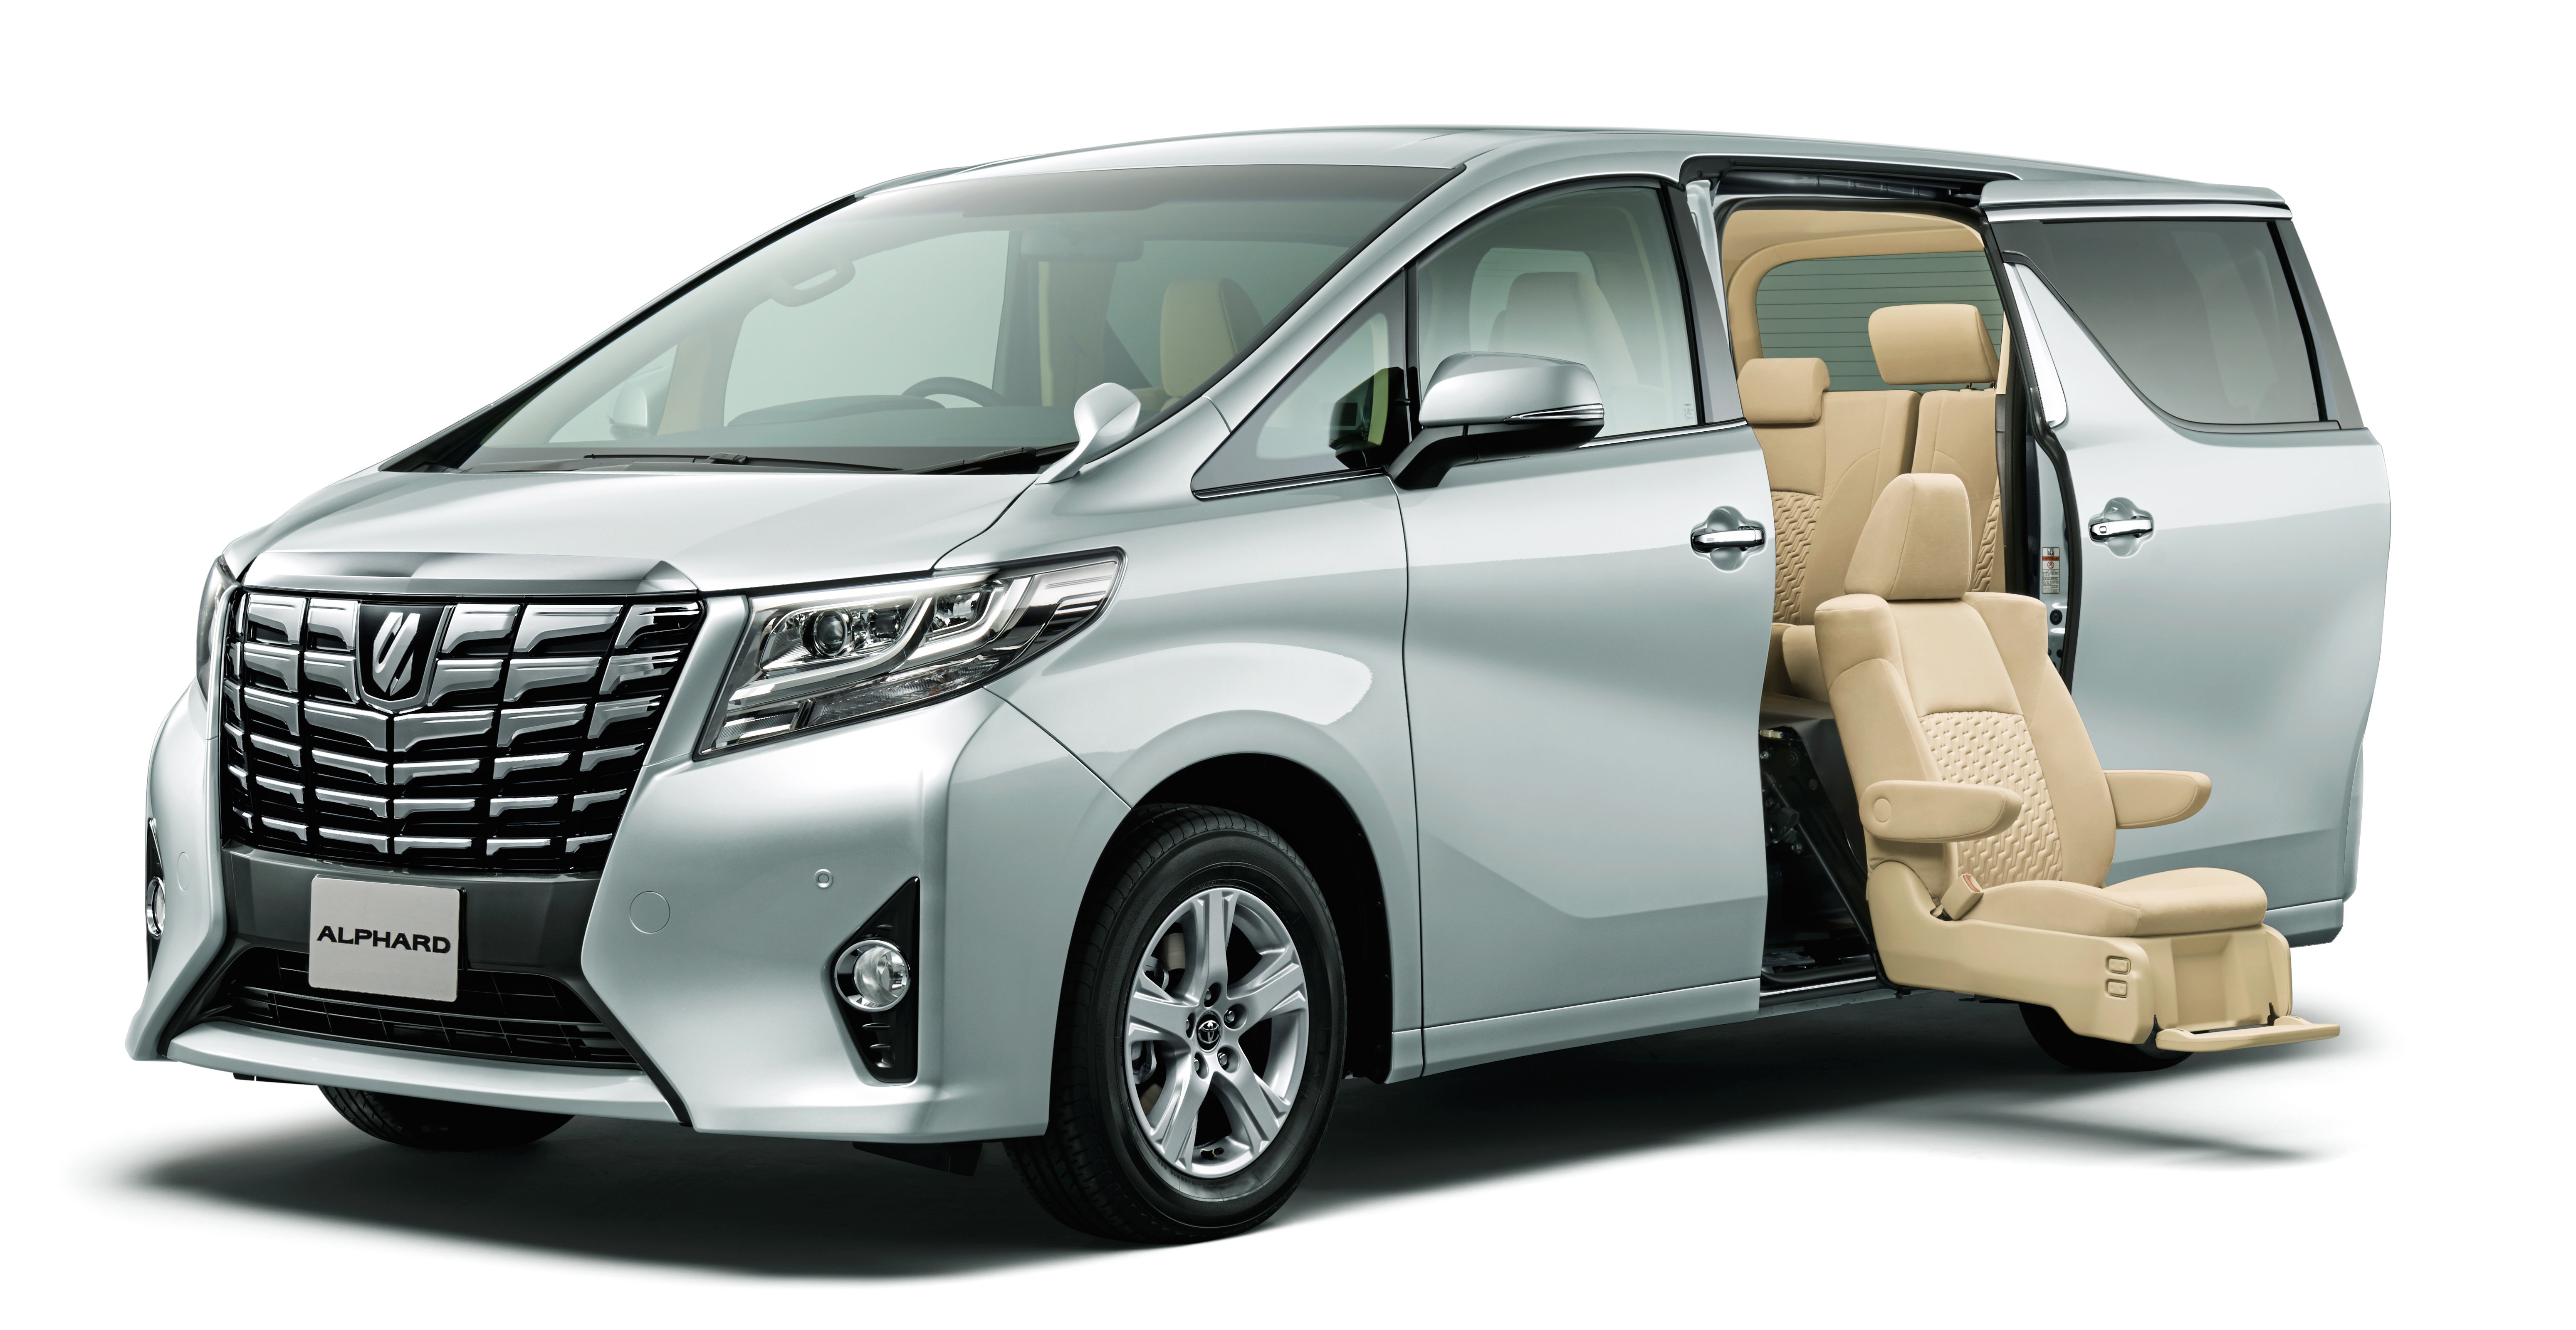 2015 Toyota Alphard 008 Alphard X With Side Lift Up Seat 